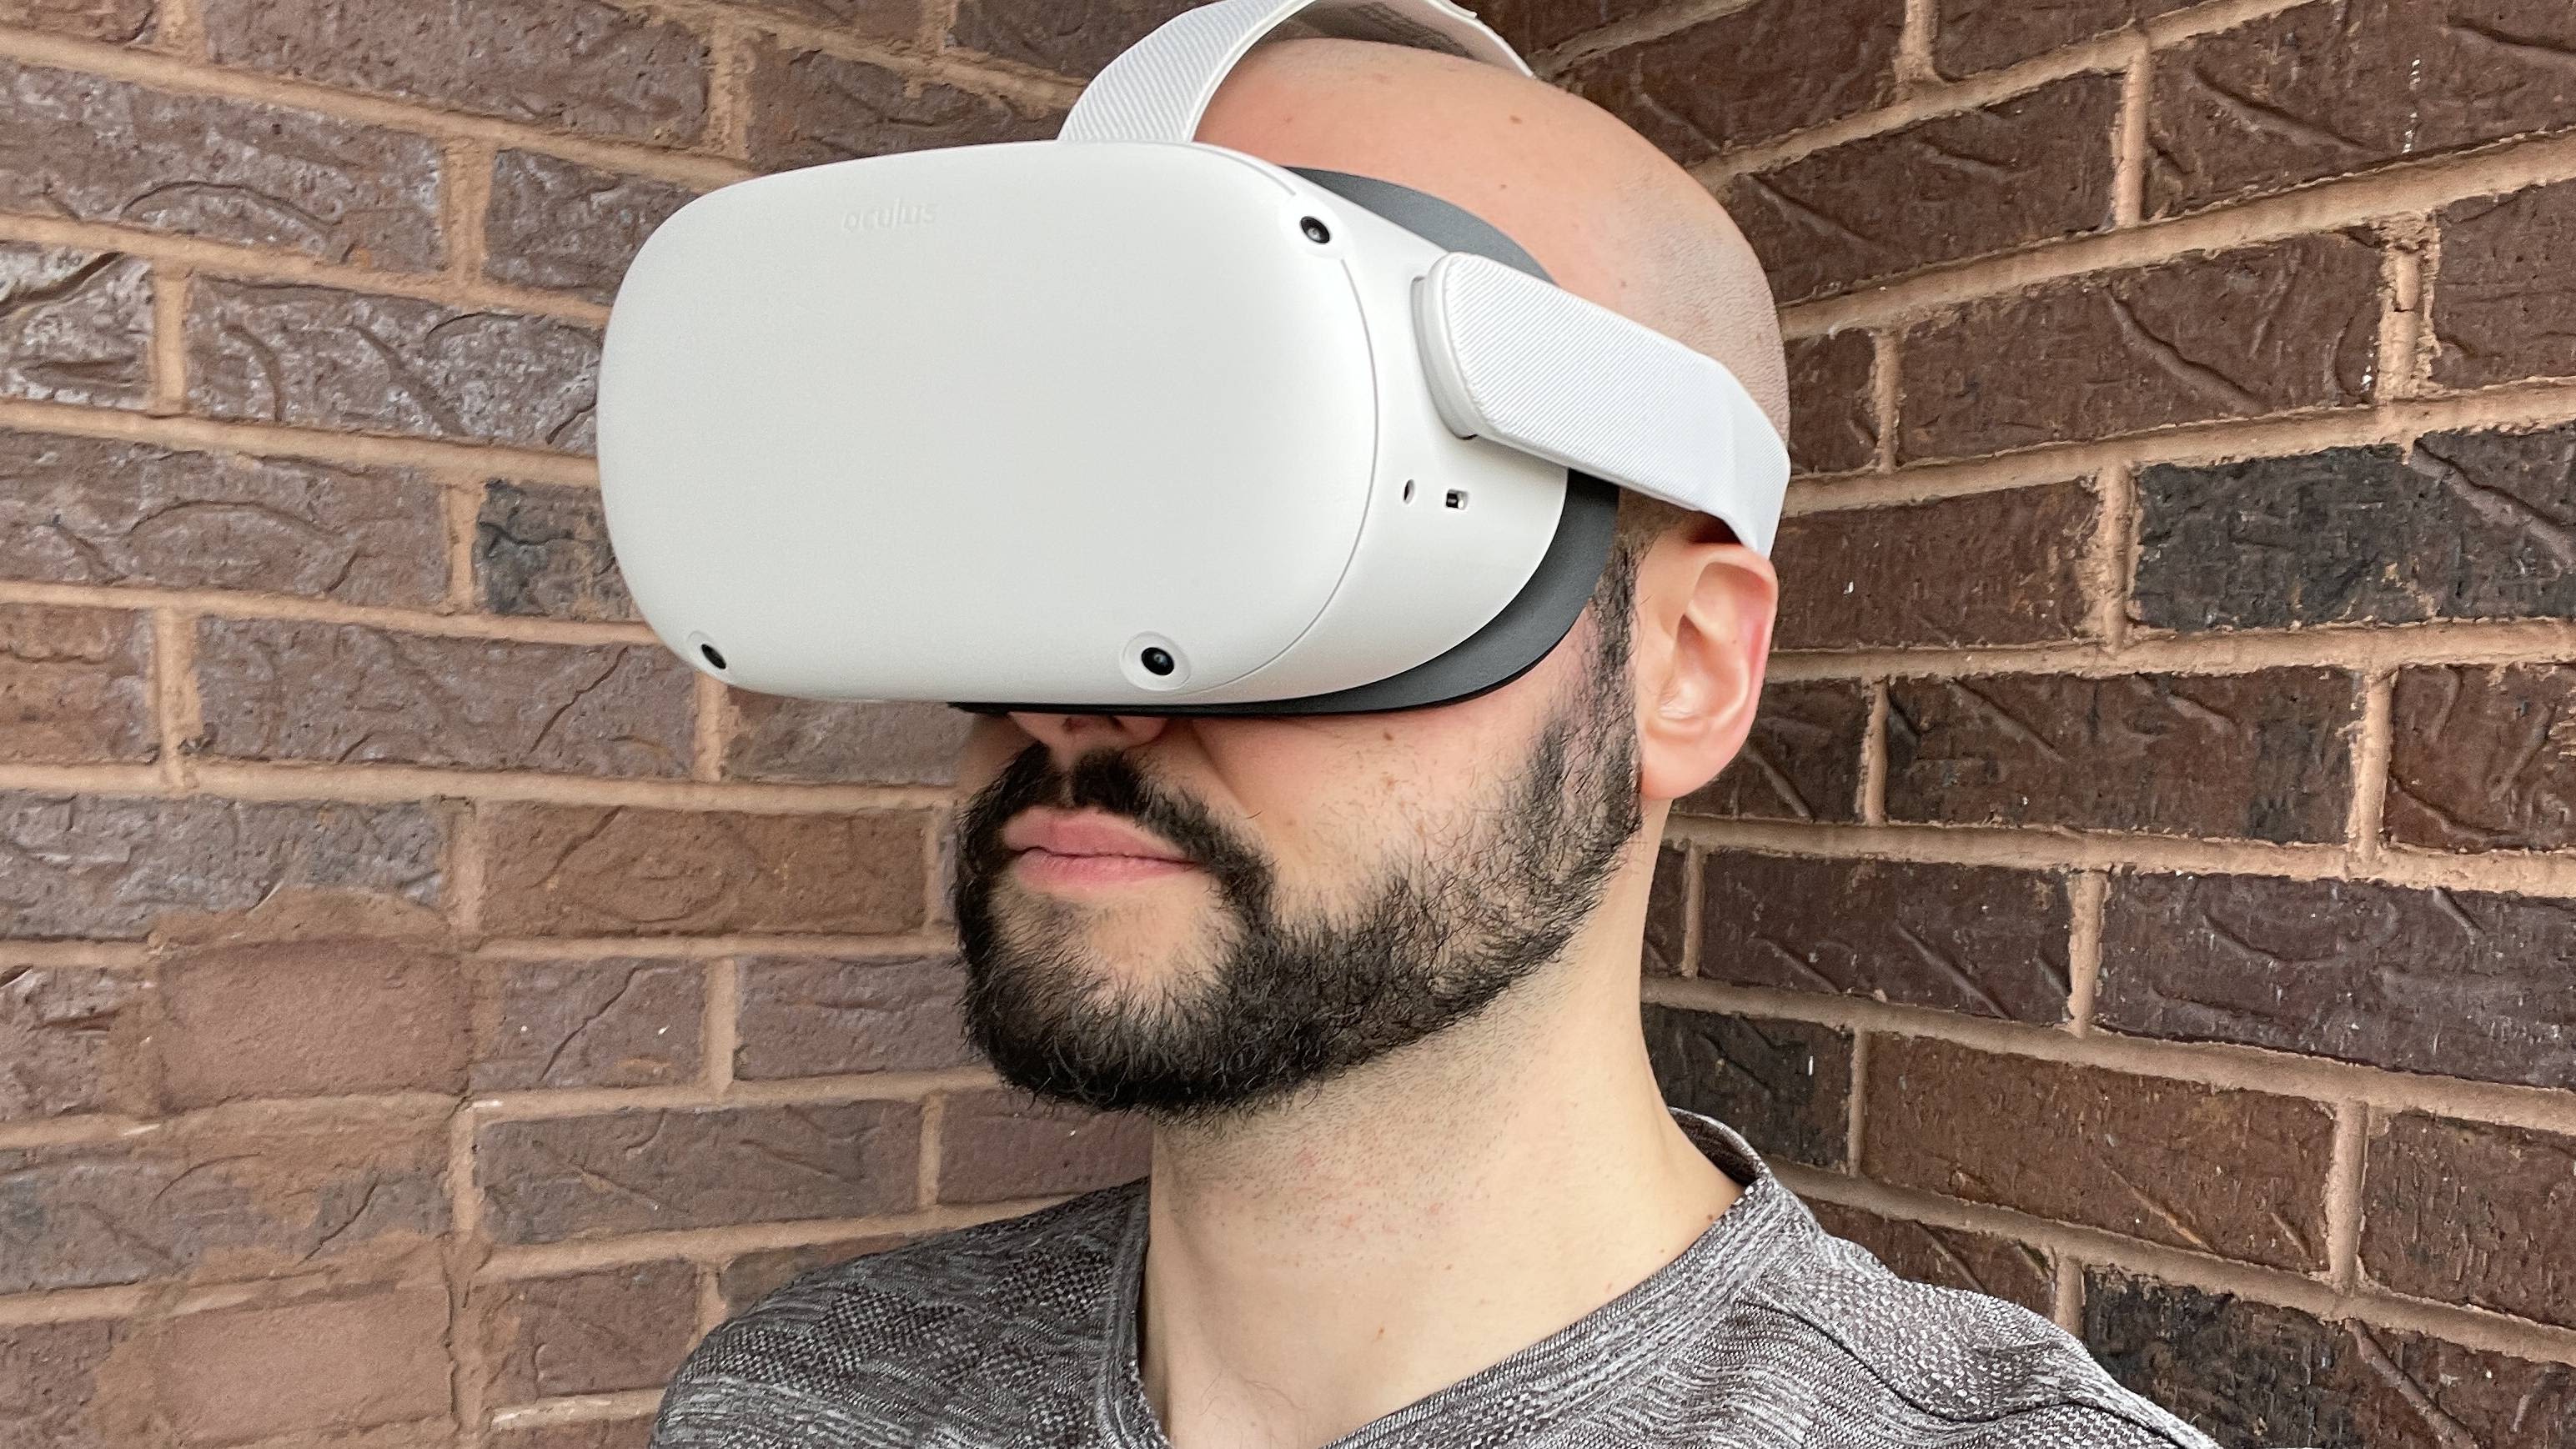 Oculus Quest 2, Virtual reality headsets